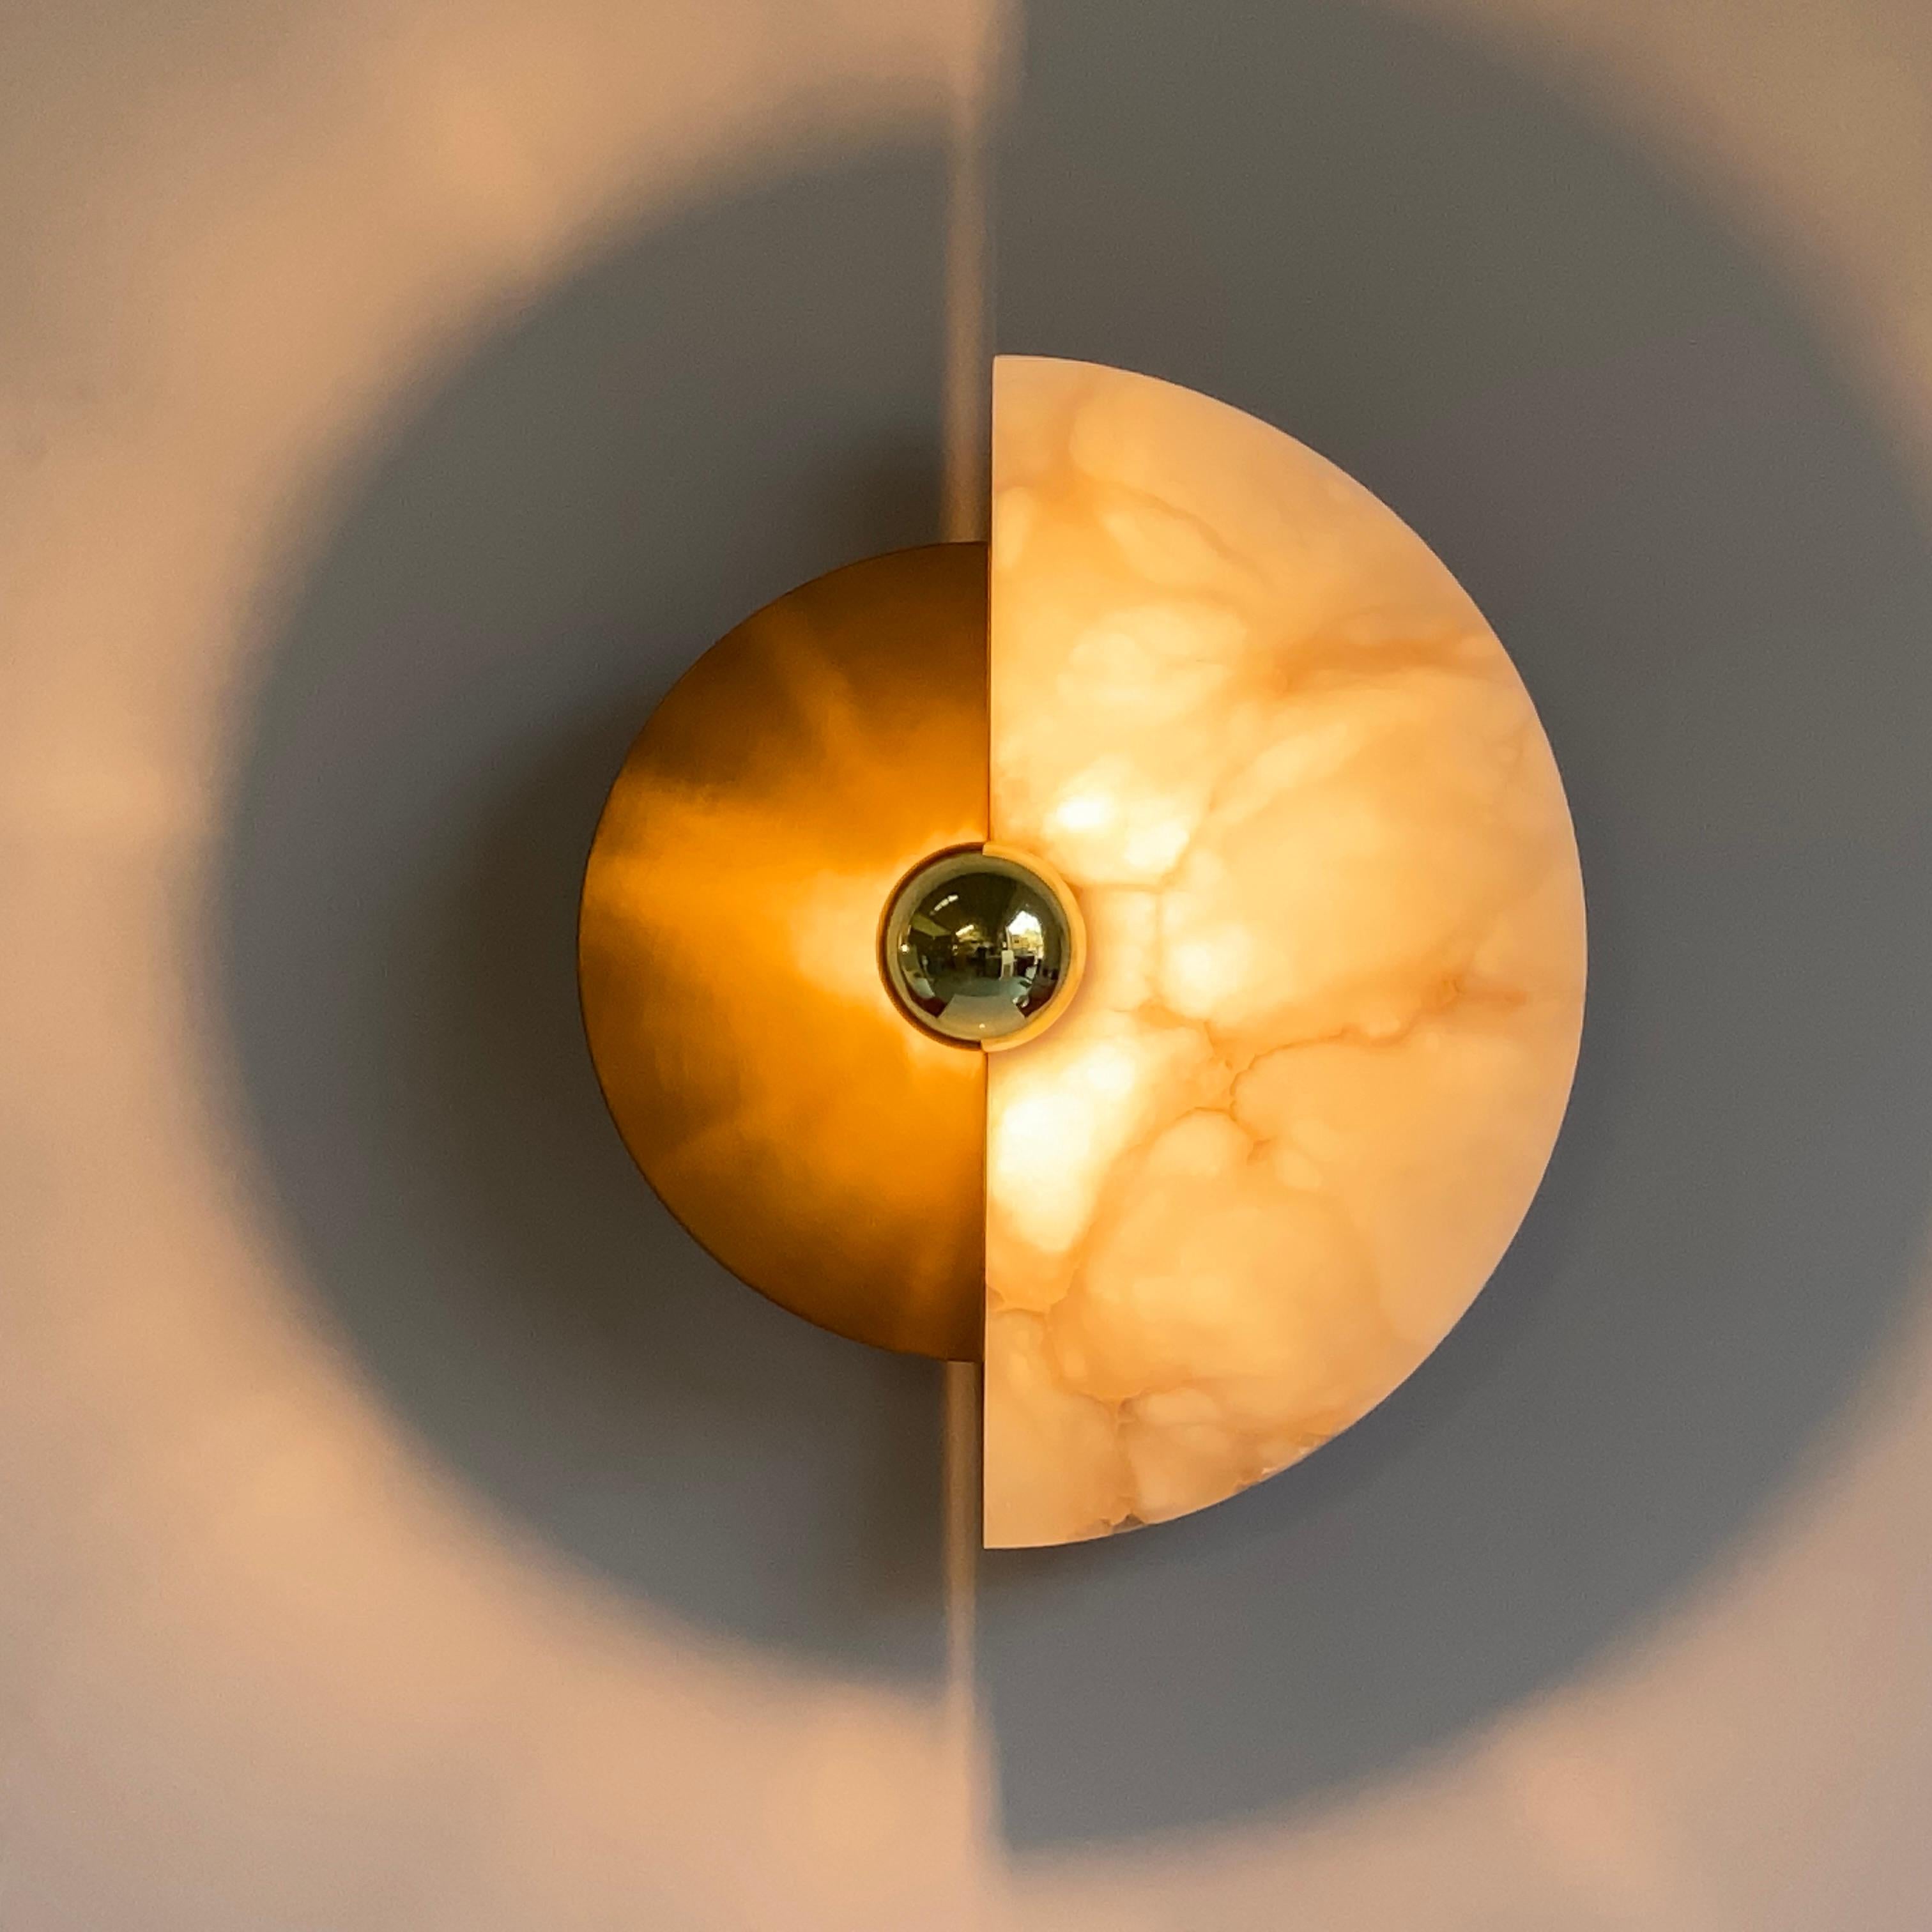 Cosulich Interiors in collaboration with Matlight: this organic wall light, entirely handcrafted in Italy, with its circular shape is called LEVANTE for its strong natural reference to the sun and the moon. The possibility of placing the two movable